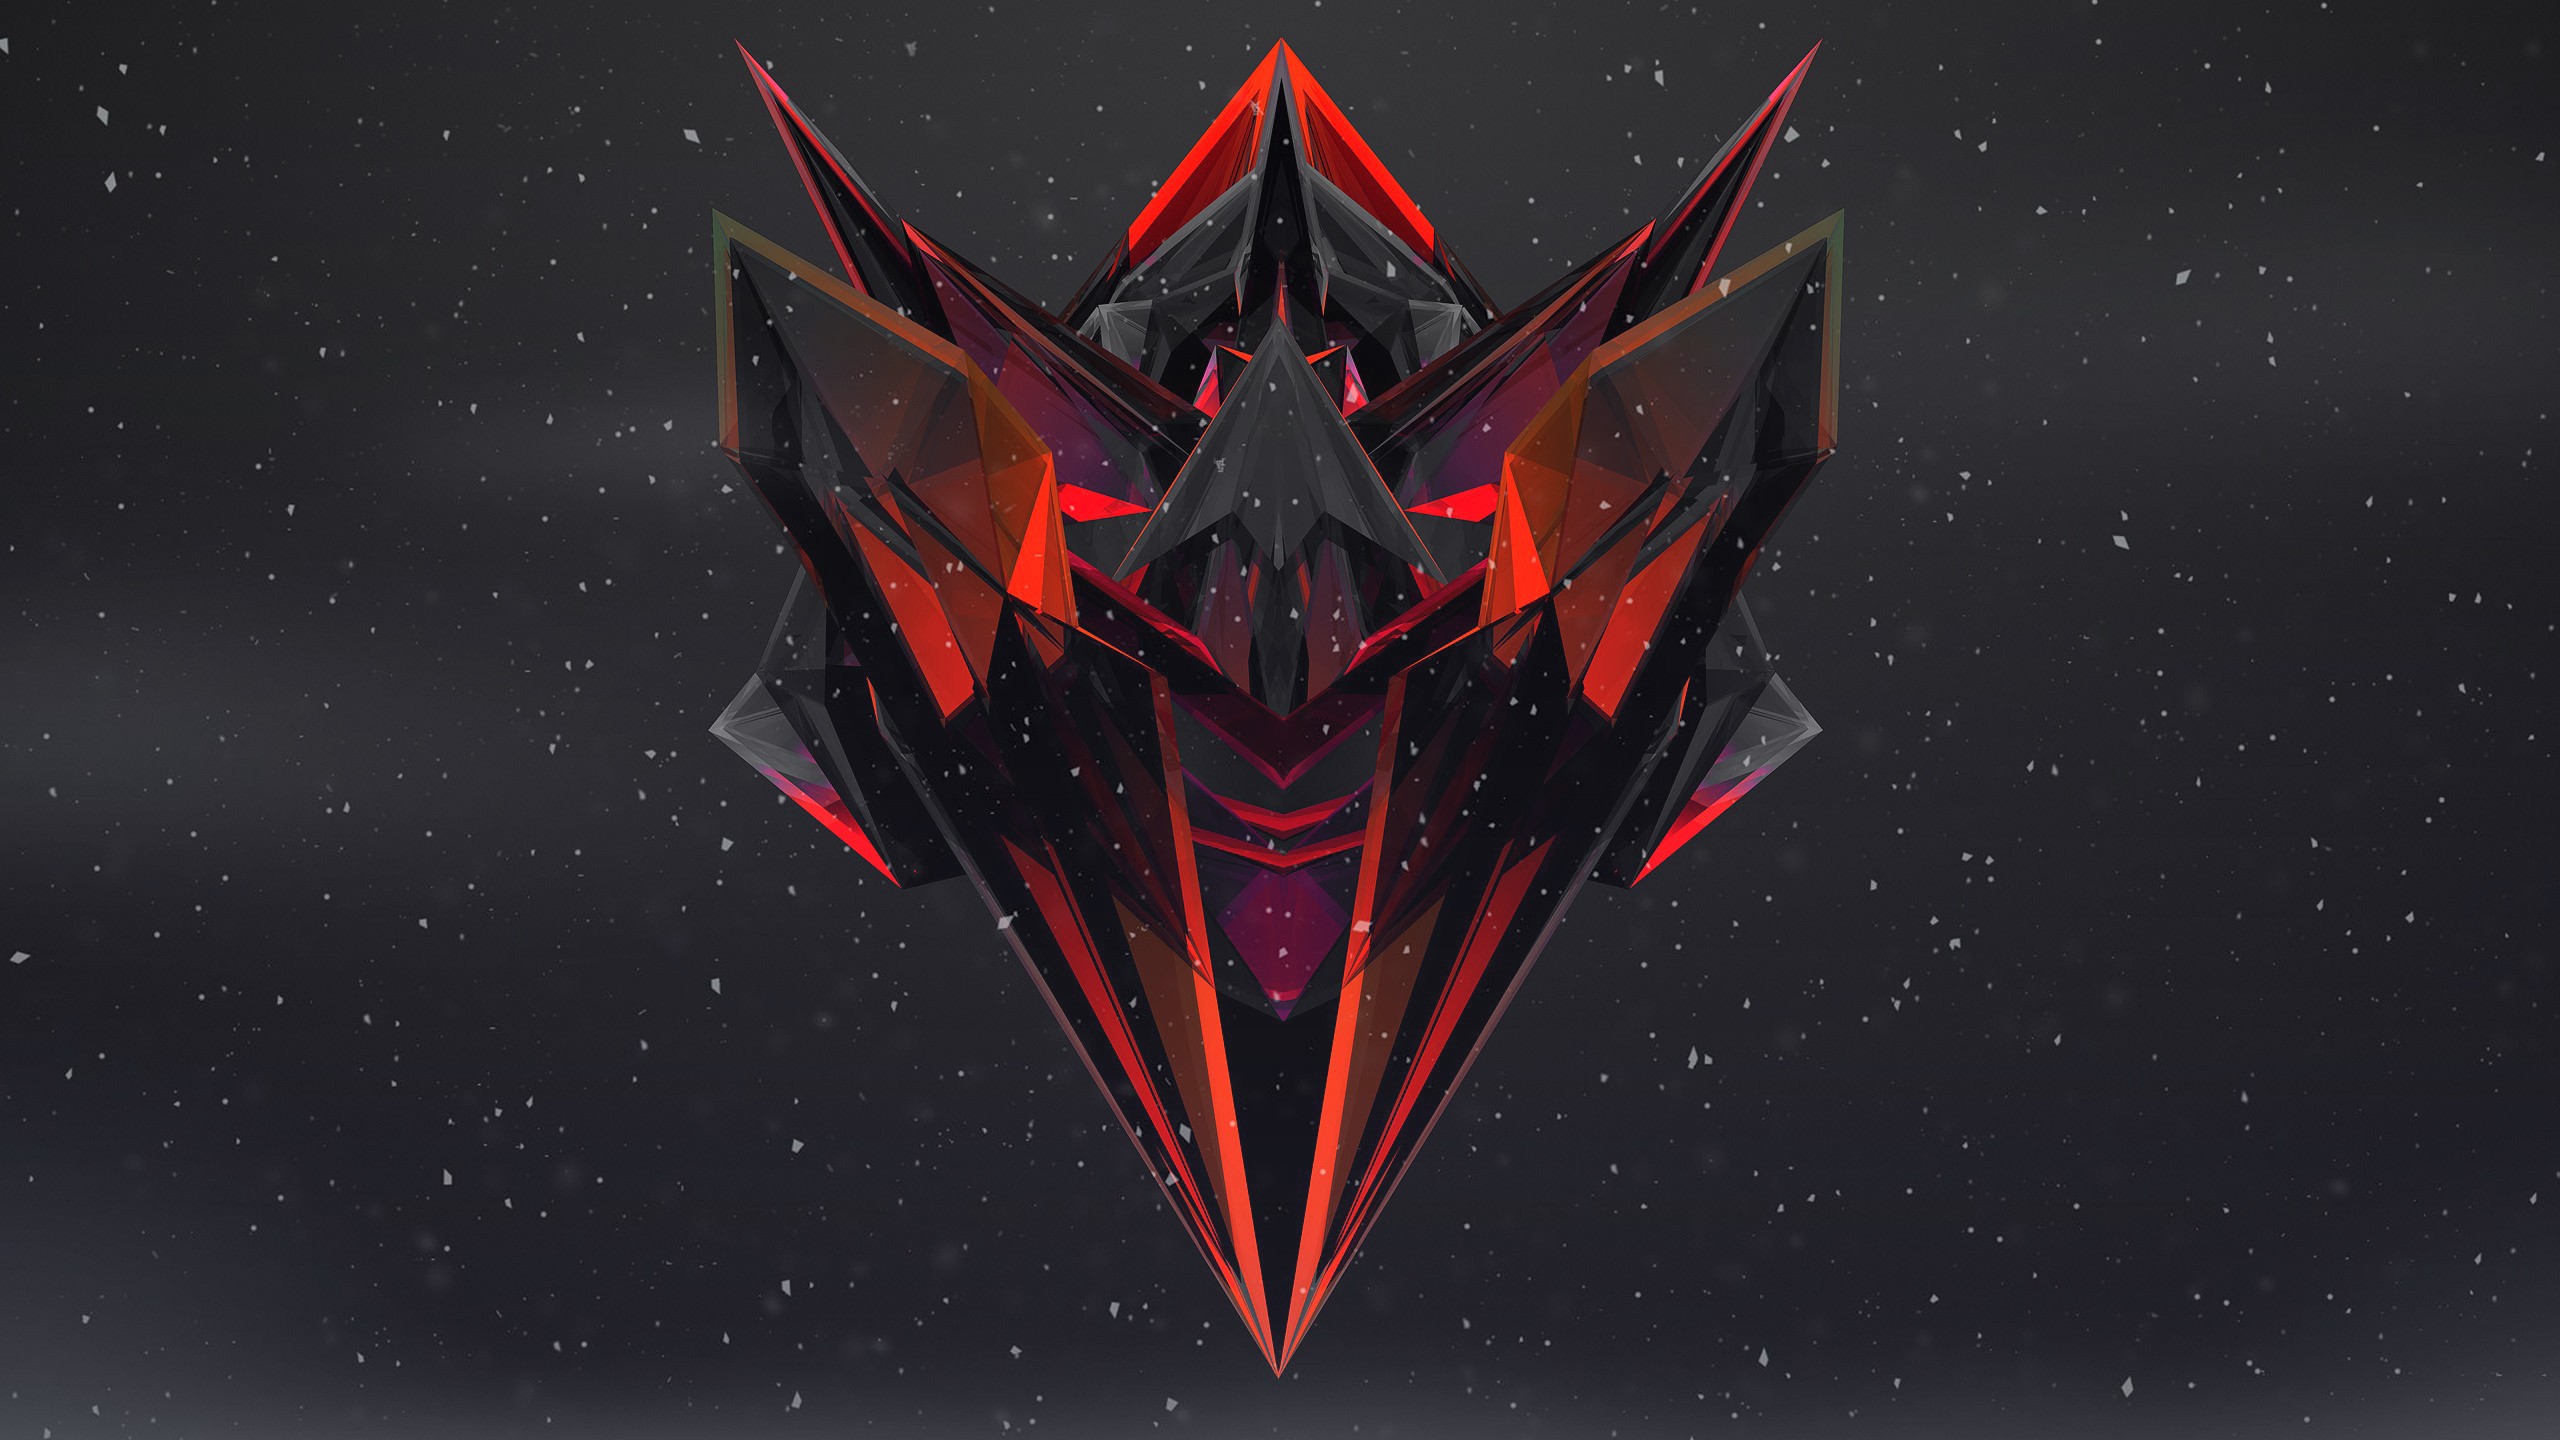 abstract triangle wallpaper,transformers,fictional character,graphics,space,graphic design